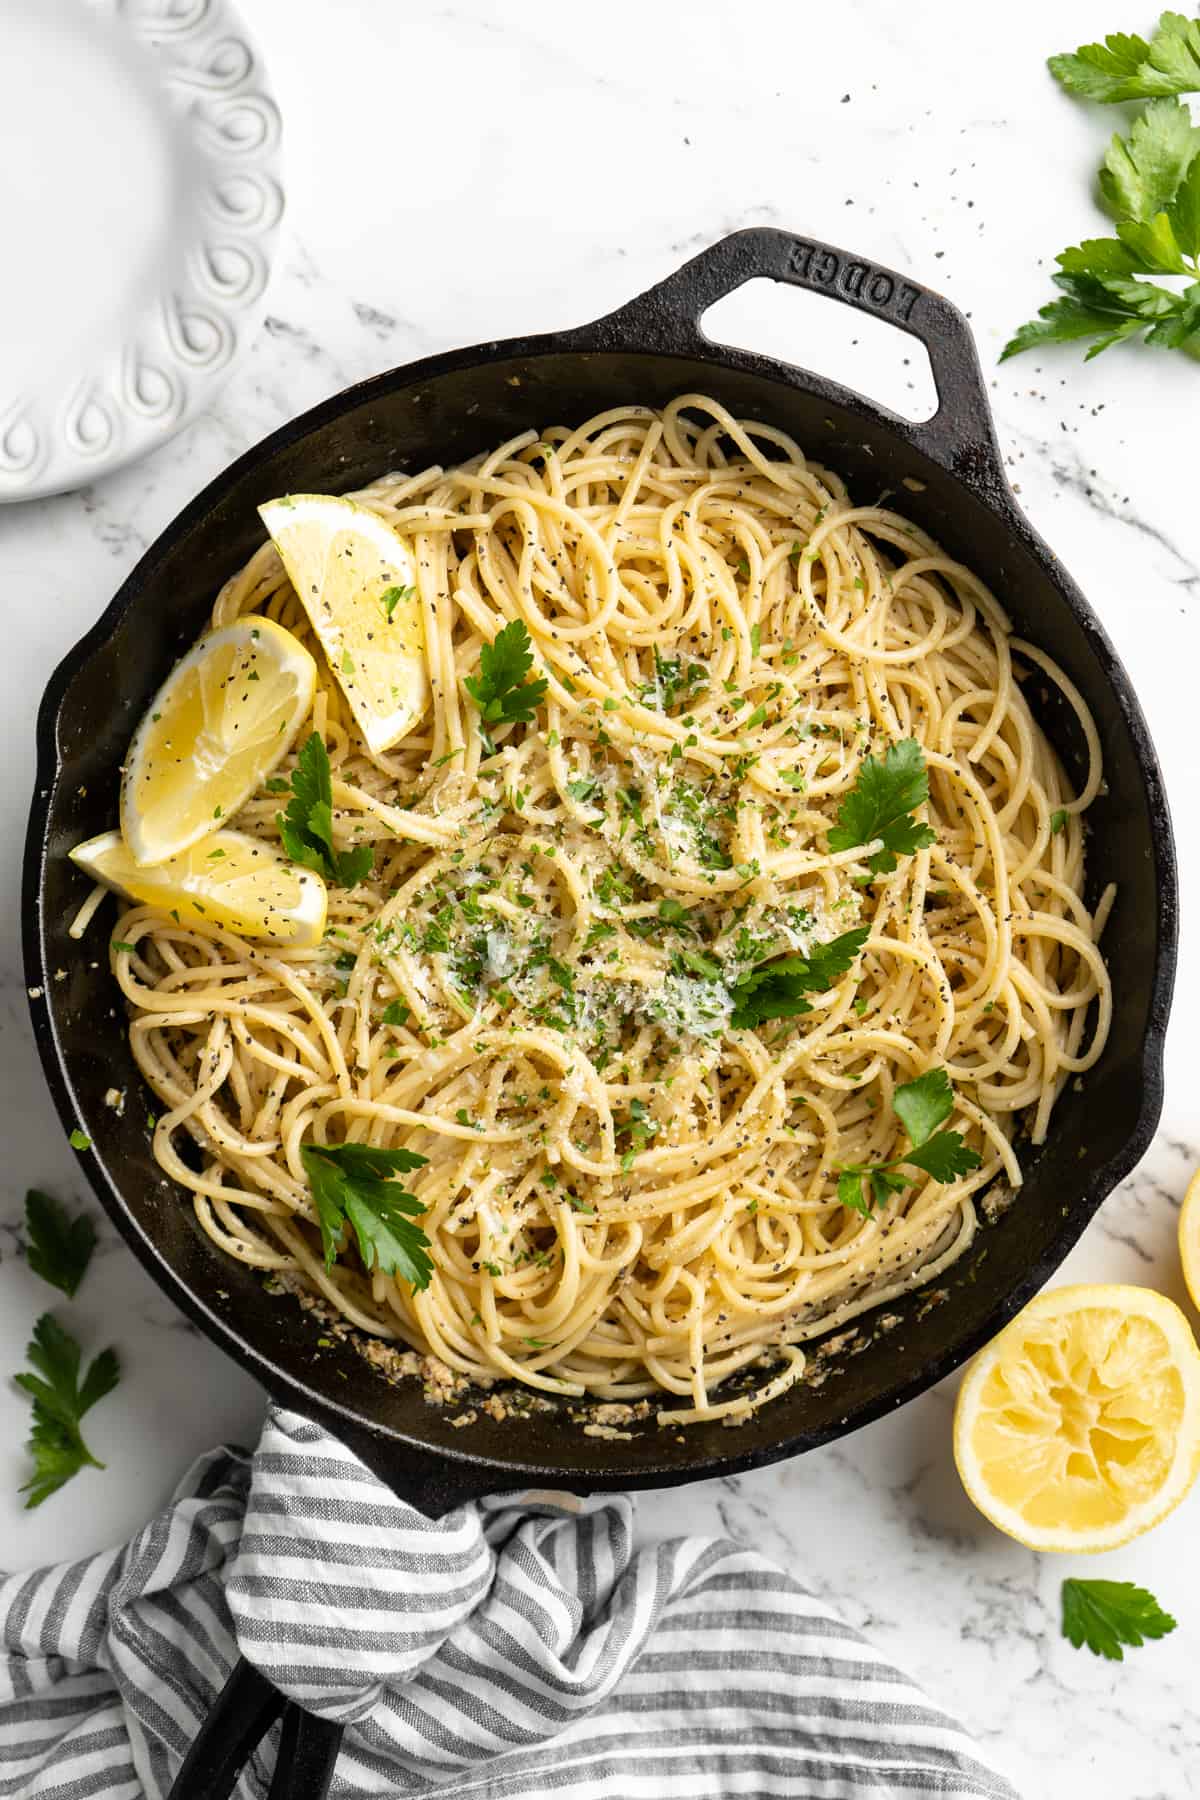 Overhead view of lemon pasta in skillet with lemon wedges and parsley for garnish